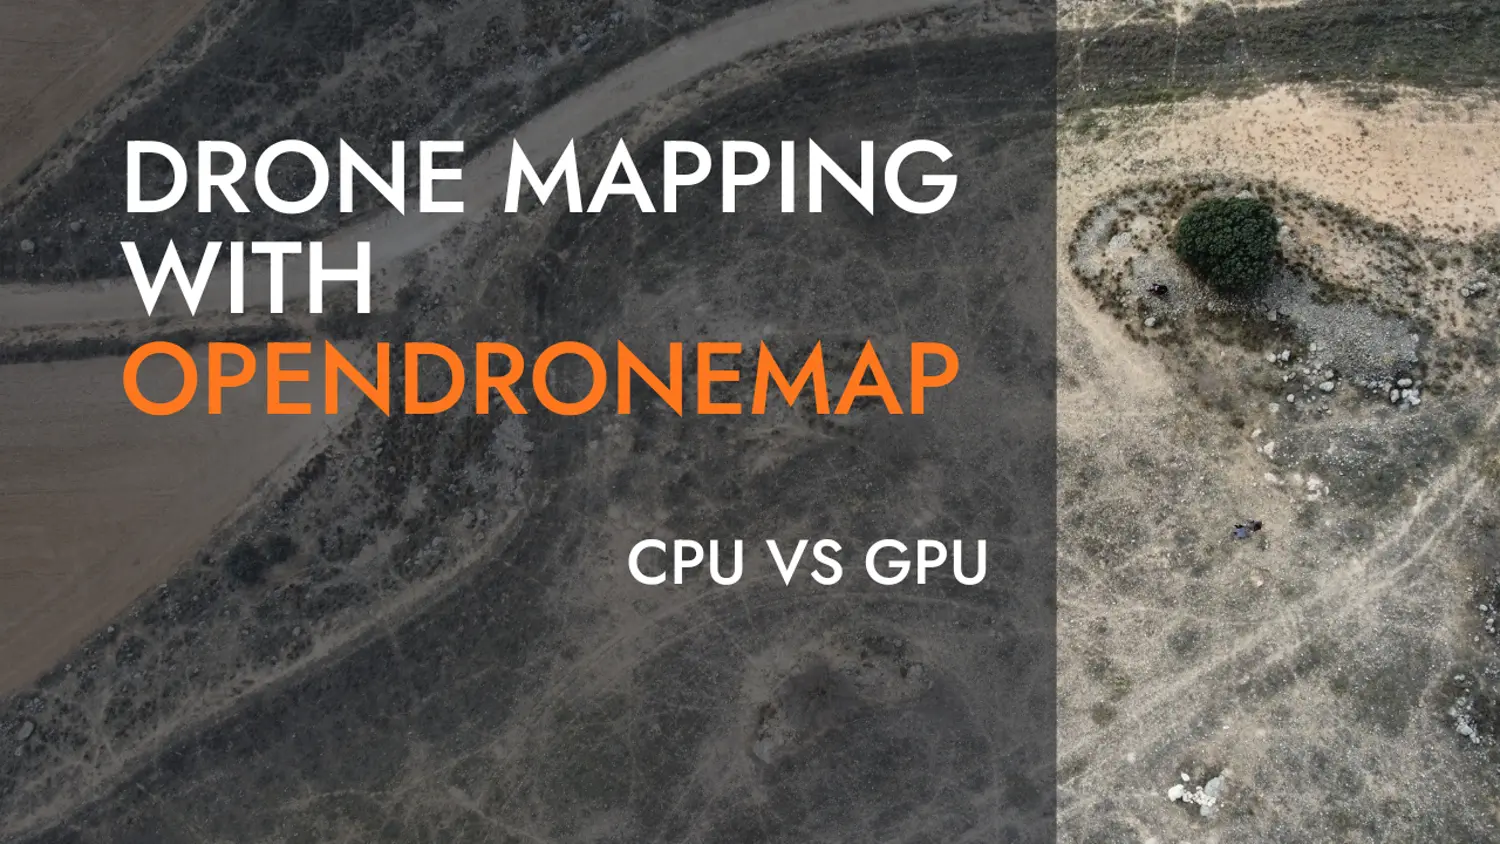 Terrain Mapping benchmark with OpenDroneMap